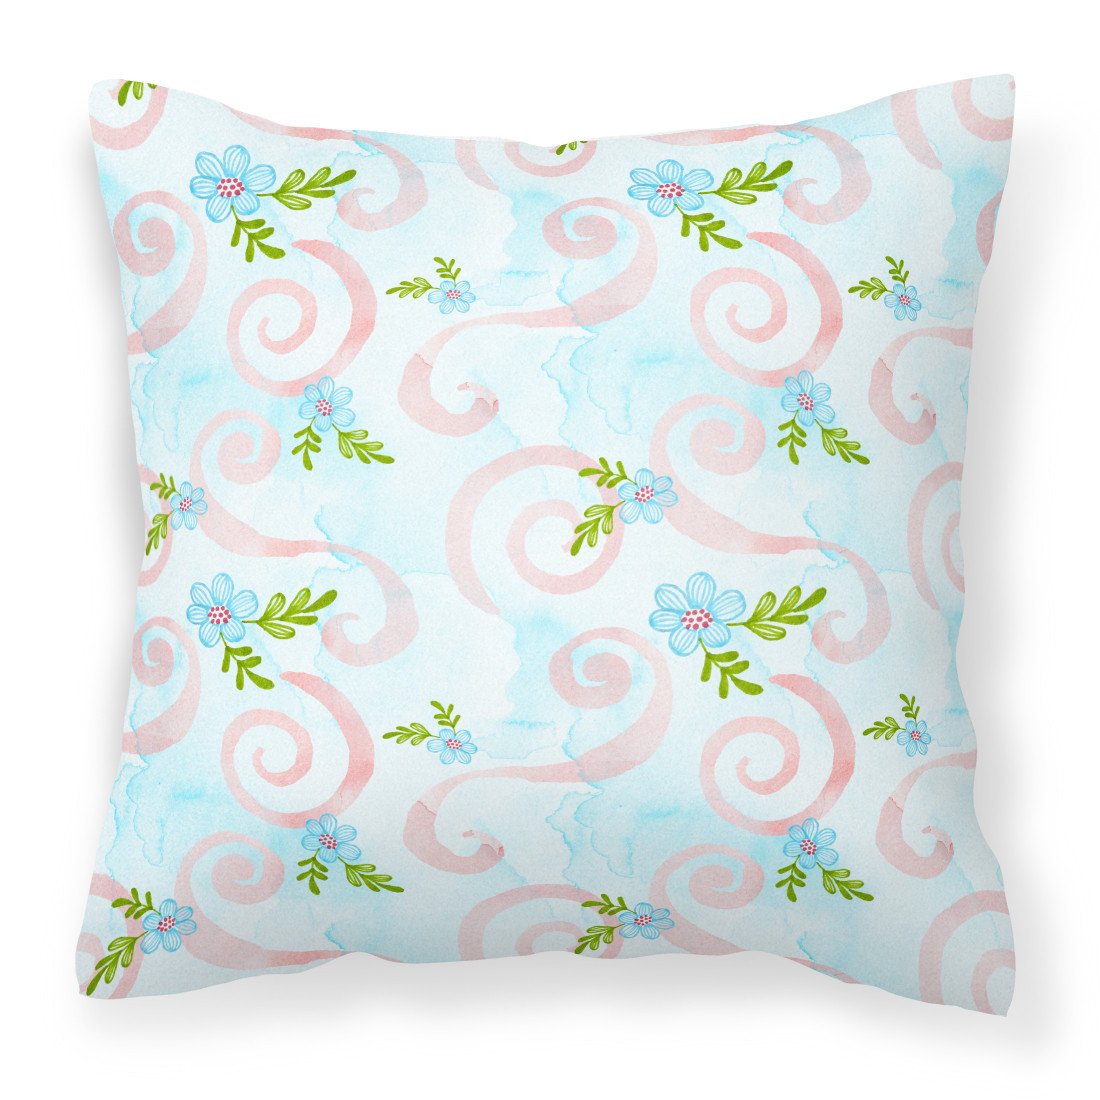 Watercolor Blue Flowers and Swirls Fabric Decorative Pillow BB7482PW1818 by Caroline's Treasures